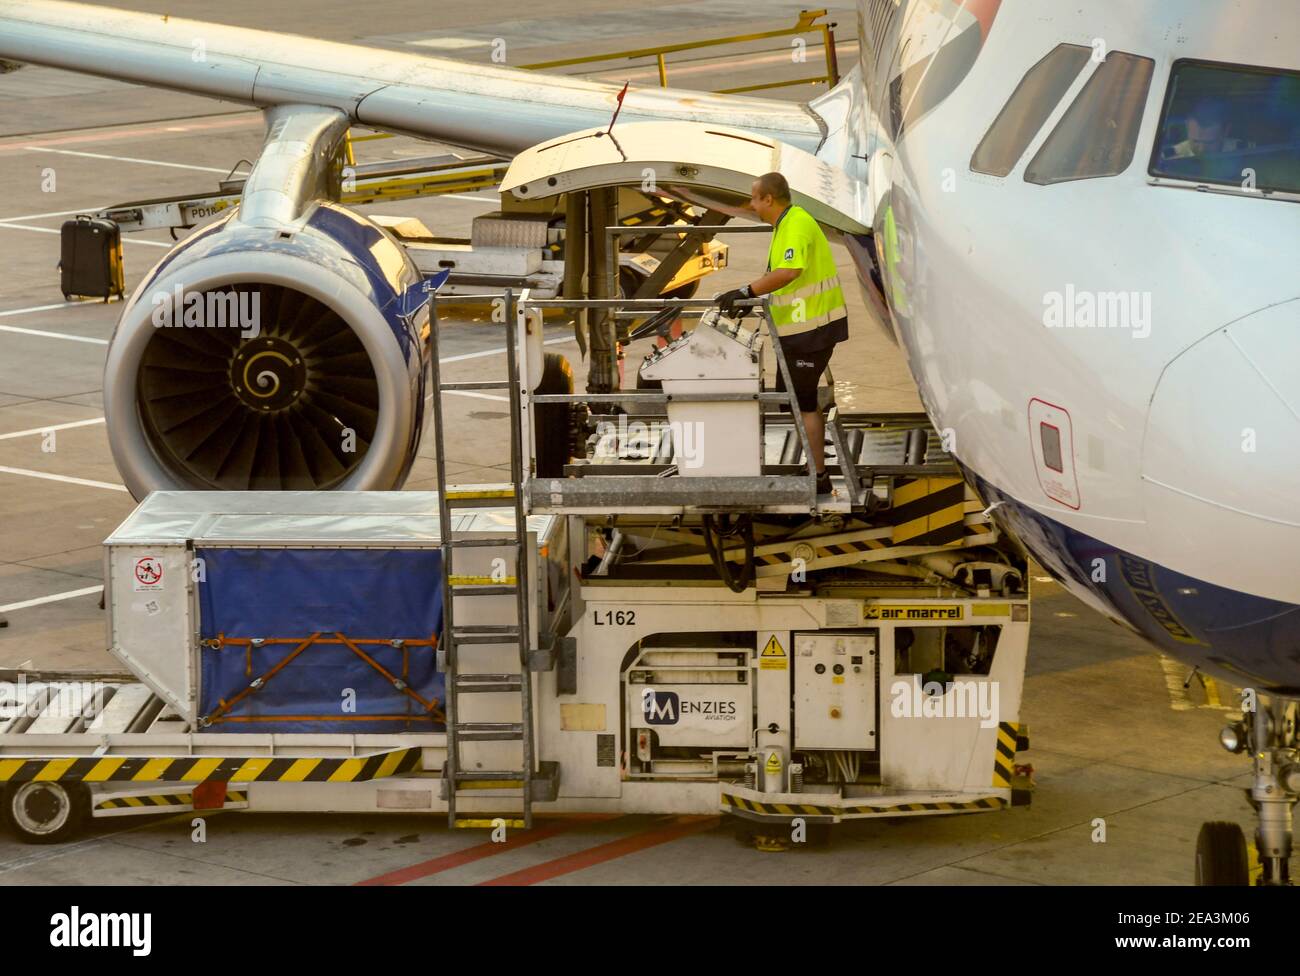 Prague, Czech Republic - August 2018: Air freight pallet being loaded into the front cargo hold of a British Airways Airbus A320 jet Stock Photo